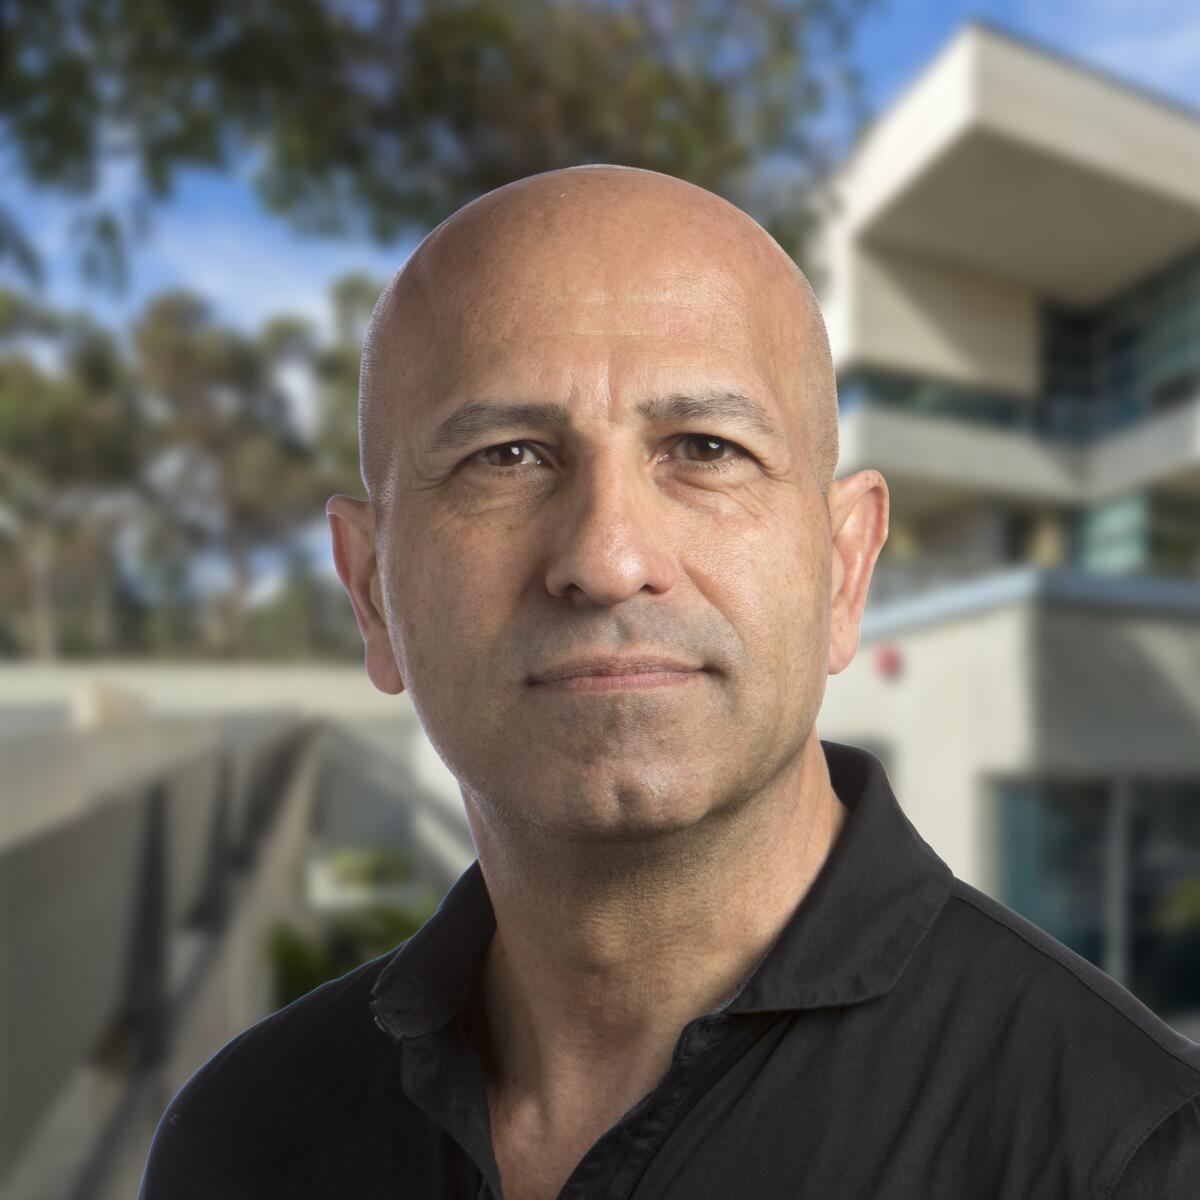 Reza Ghadiri will present as part of the Scripps Research Front Row Lecture Series.